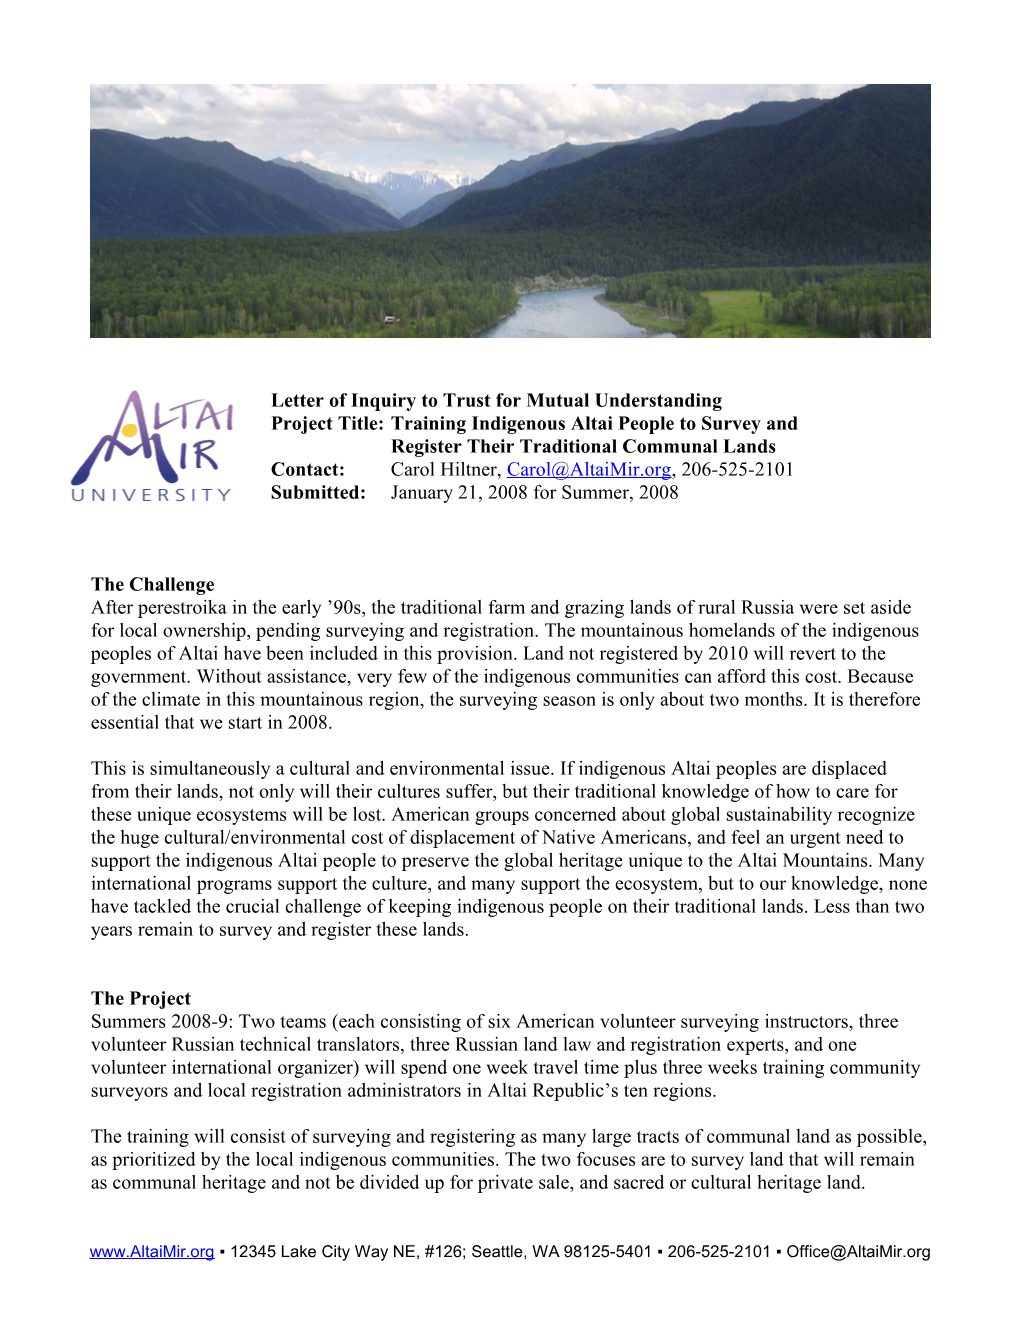 Project Title: Training Indigenous Altai People to Survey And